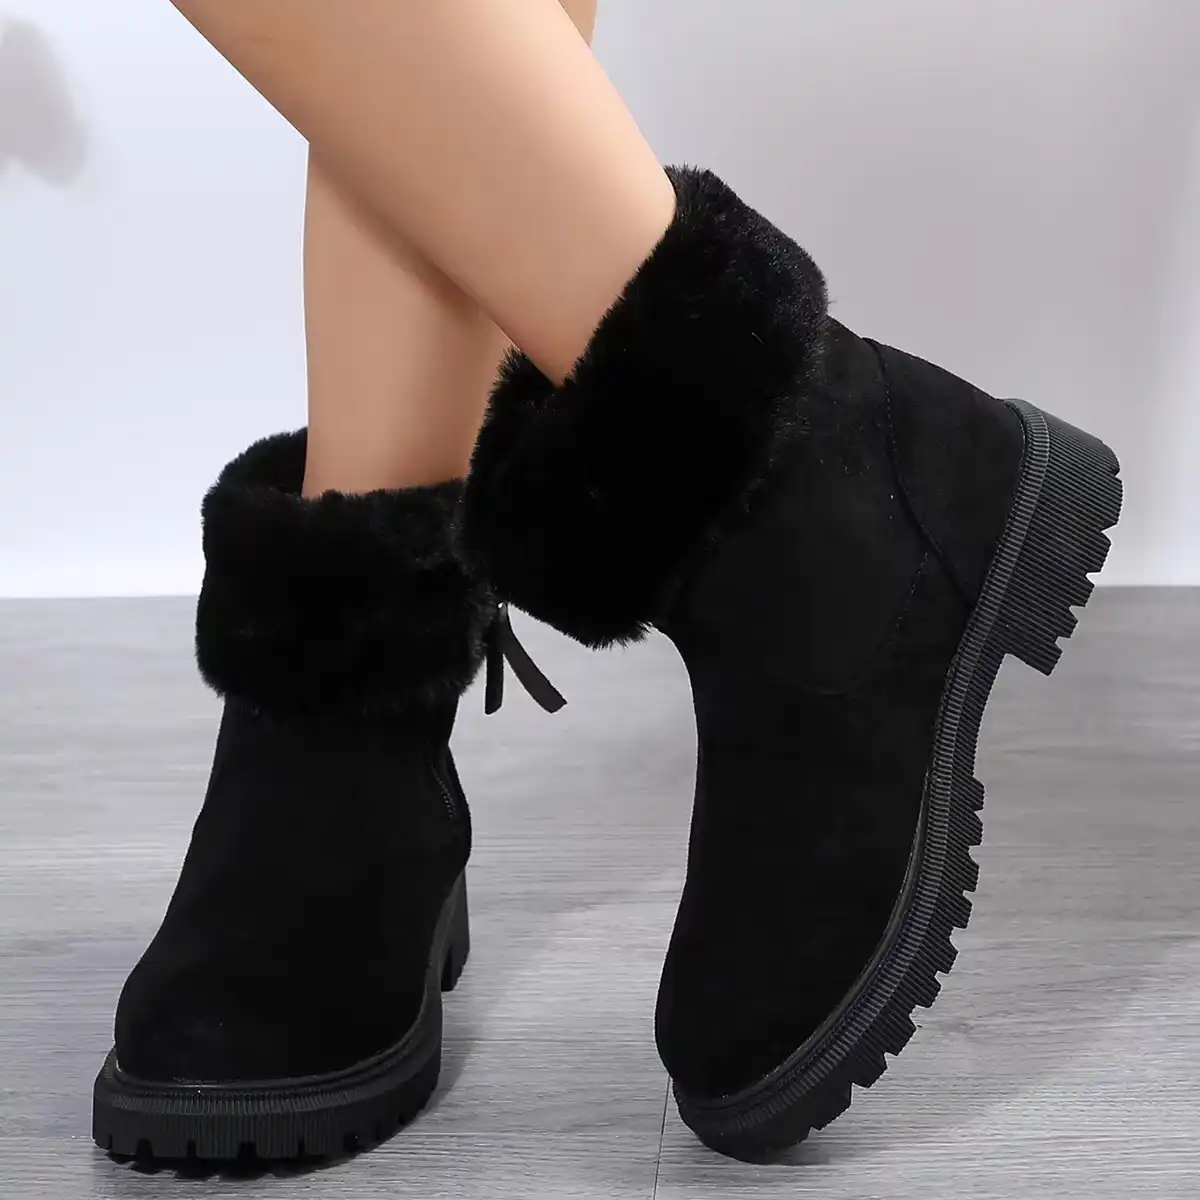 Shop Best Women's Boots| Ankle & Thigh High Fashion Women's Boots ...